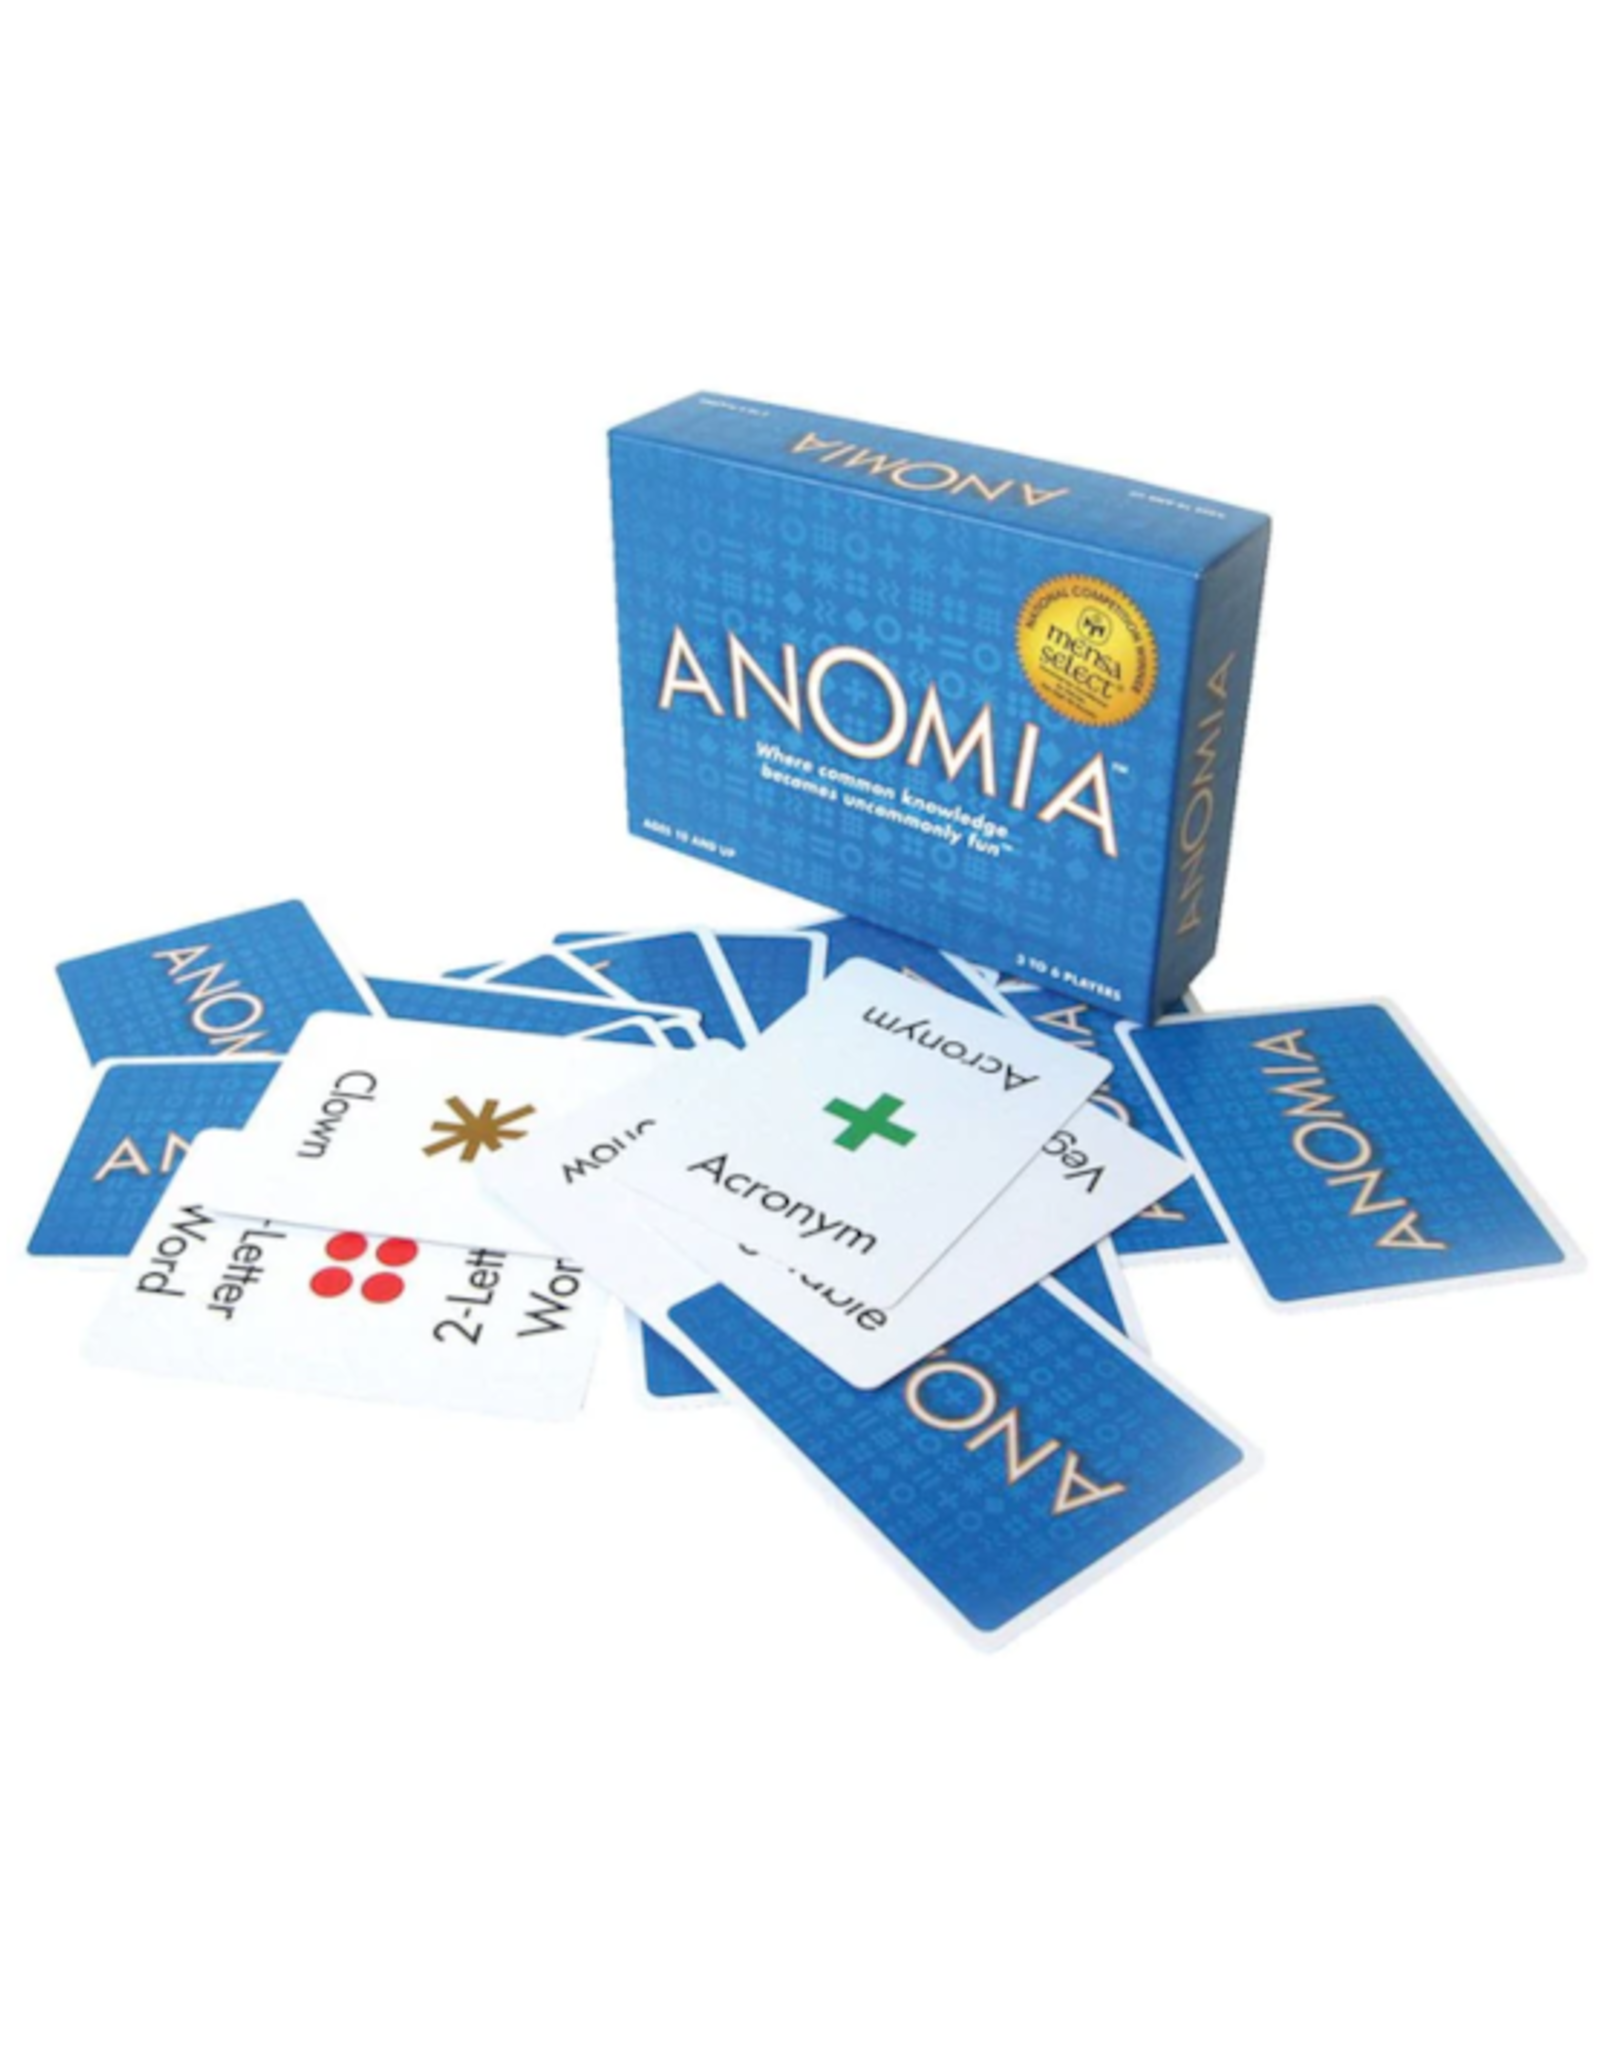 Anomia Standard Card Game